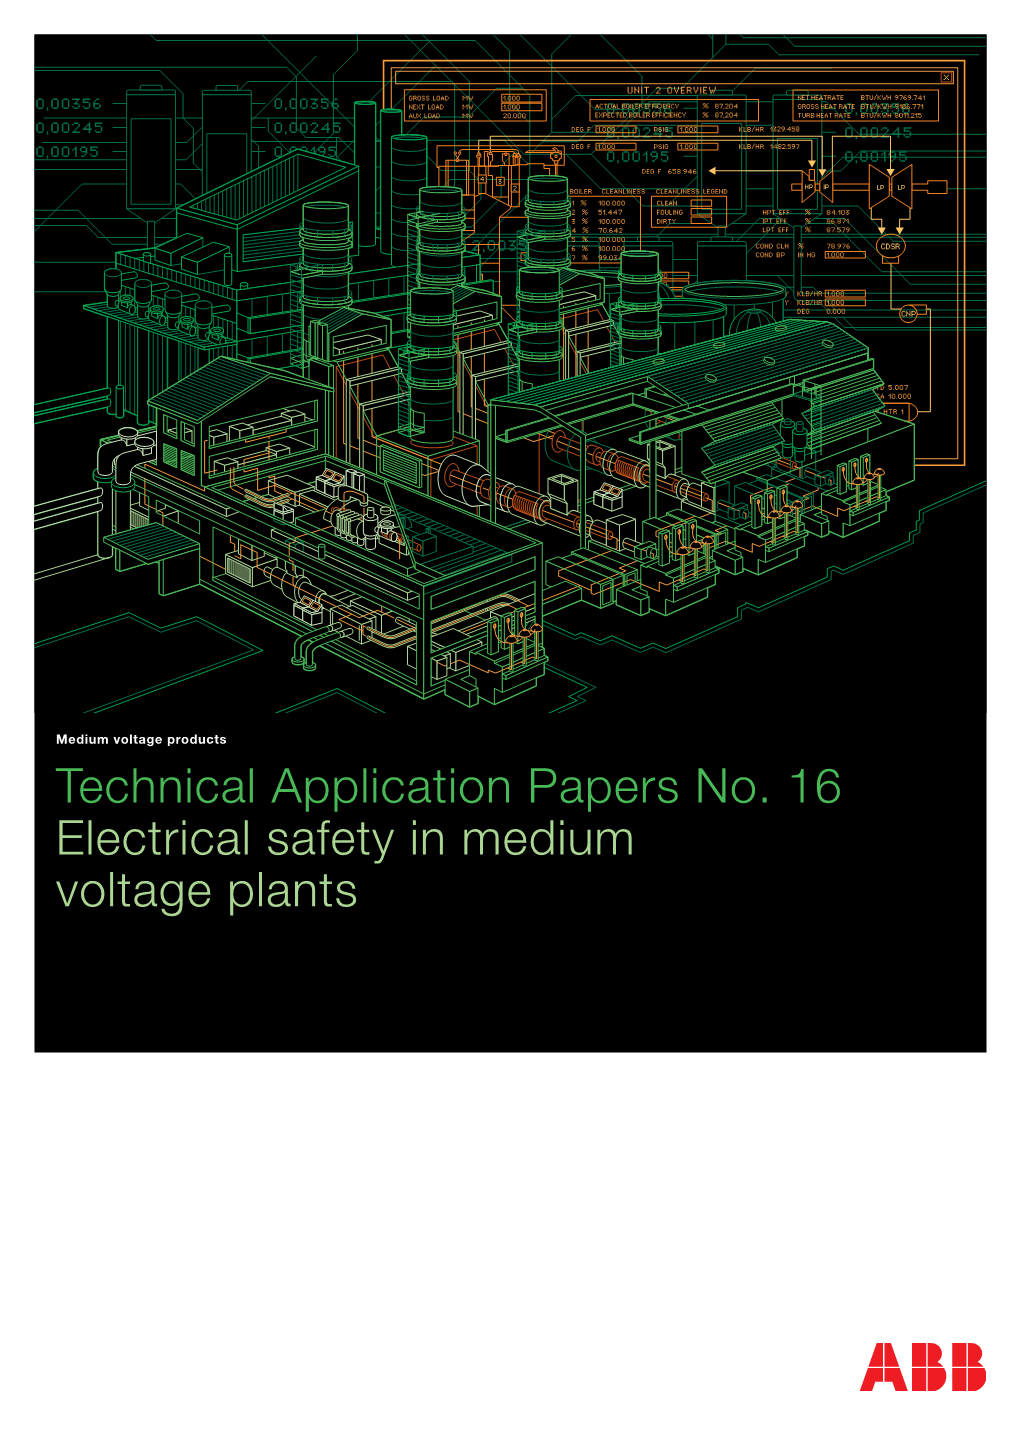 Technical Application Papers No. 16 Electrical Safety in Medium Voltage Plants